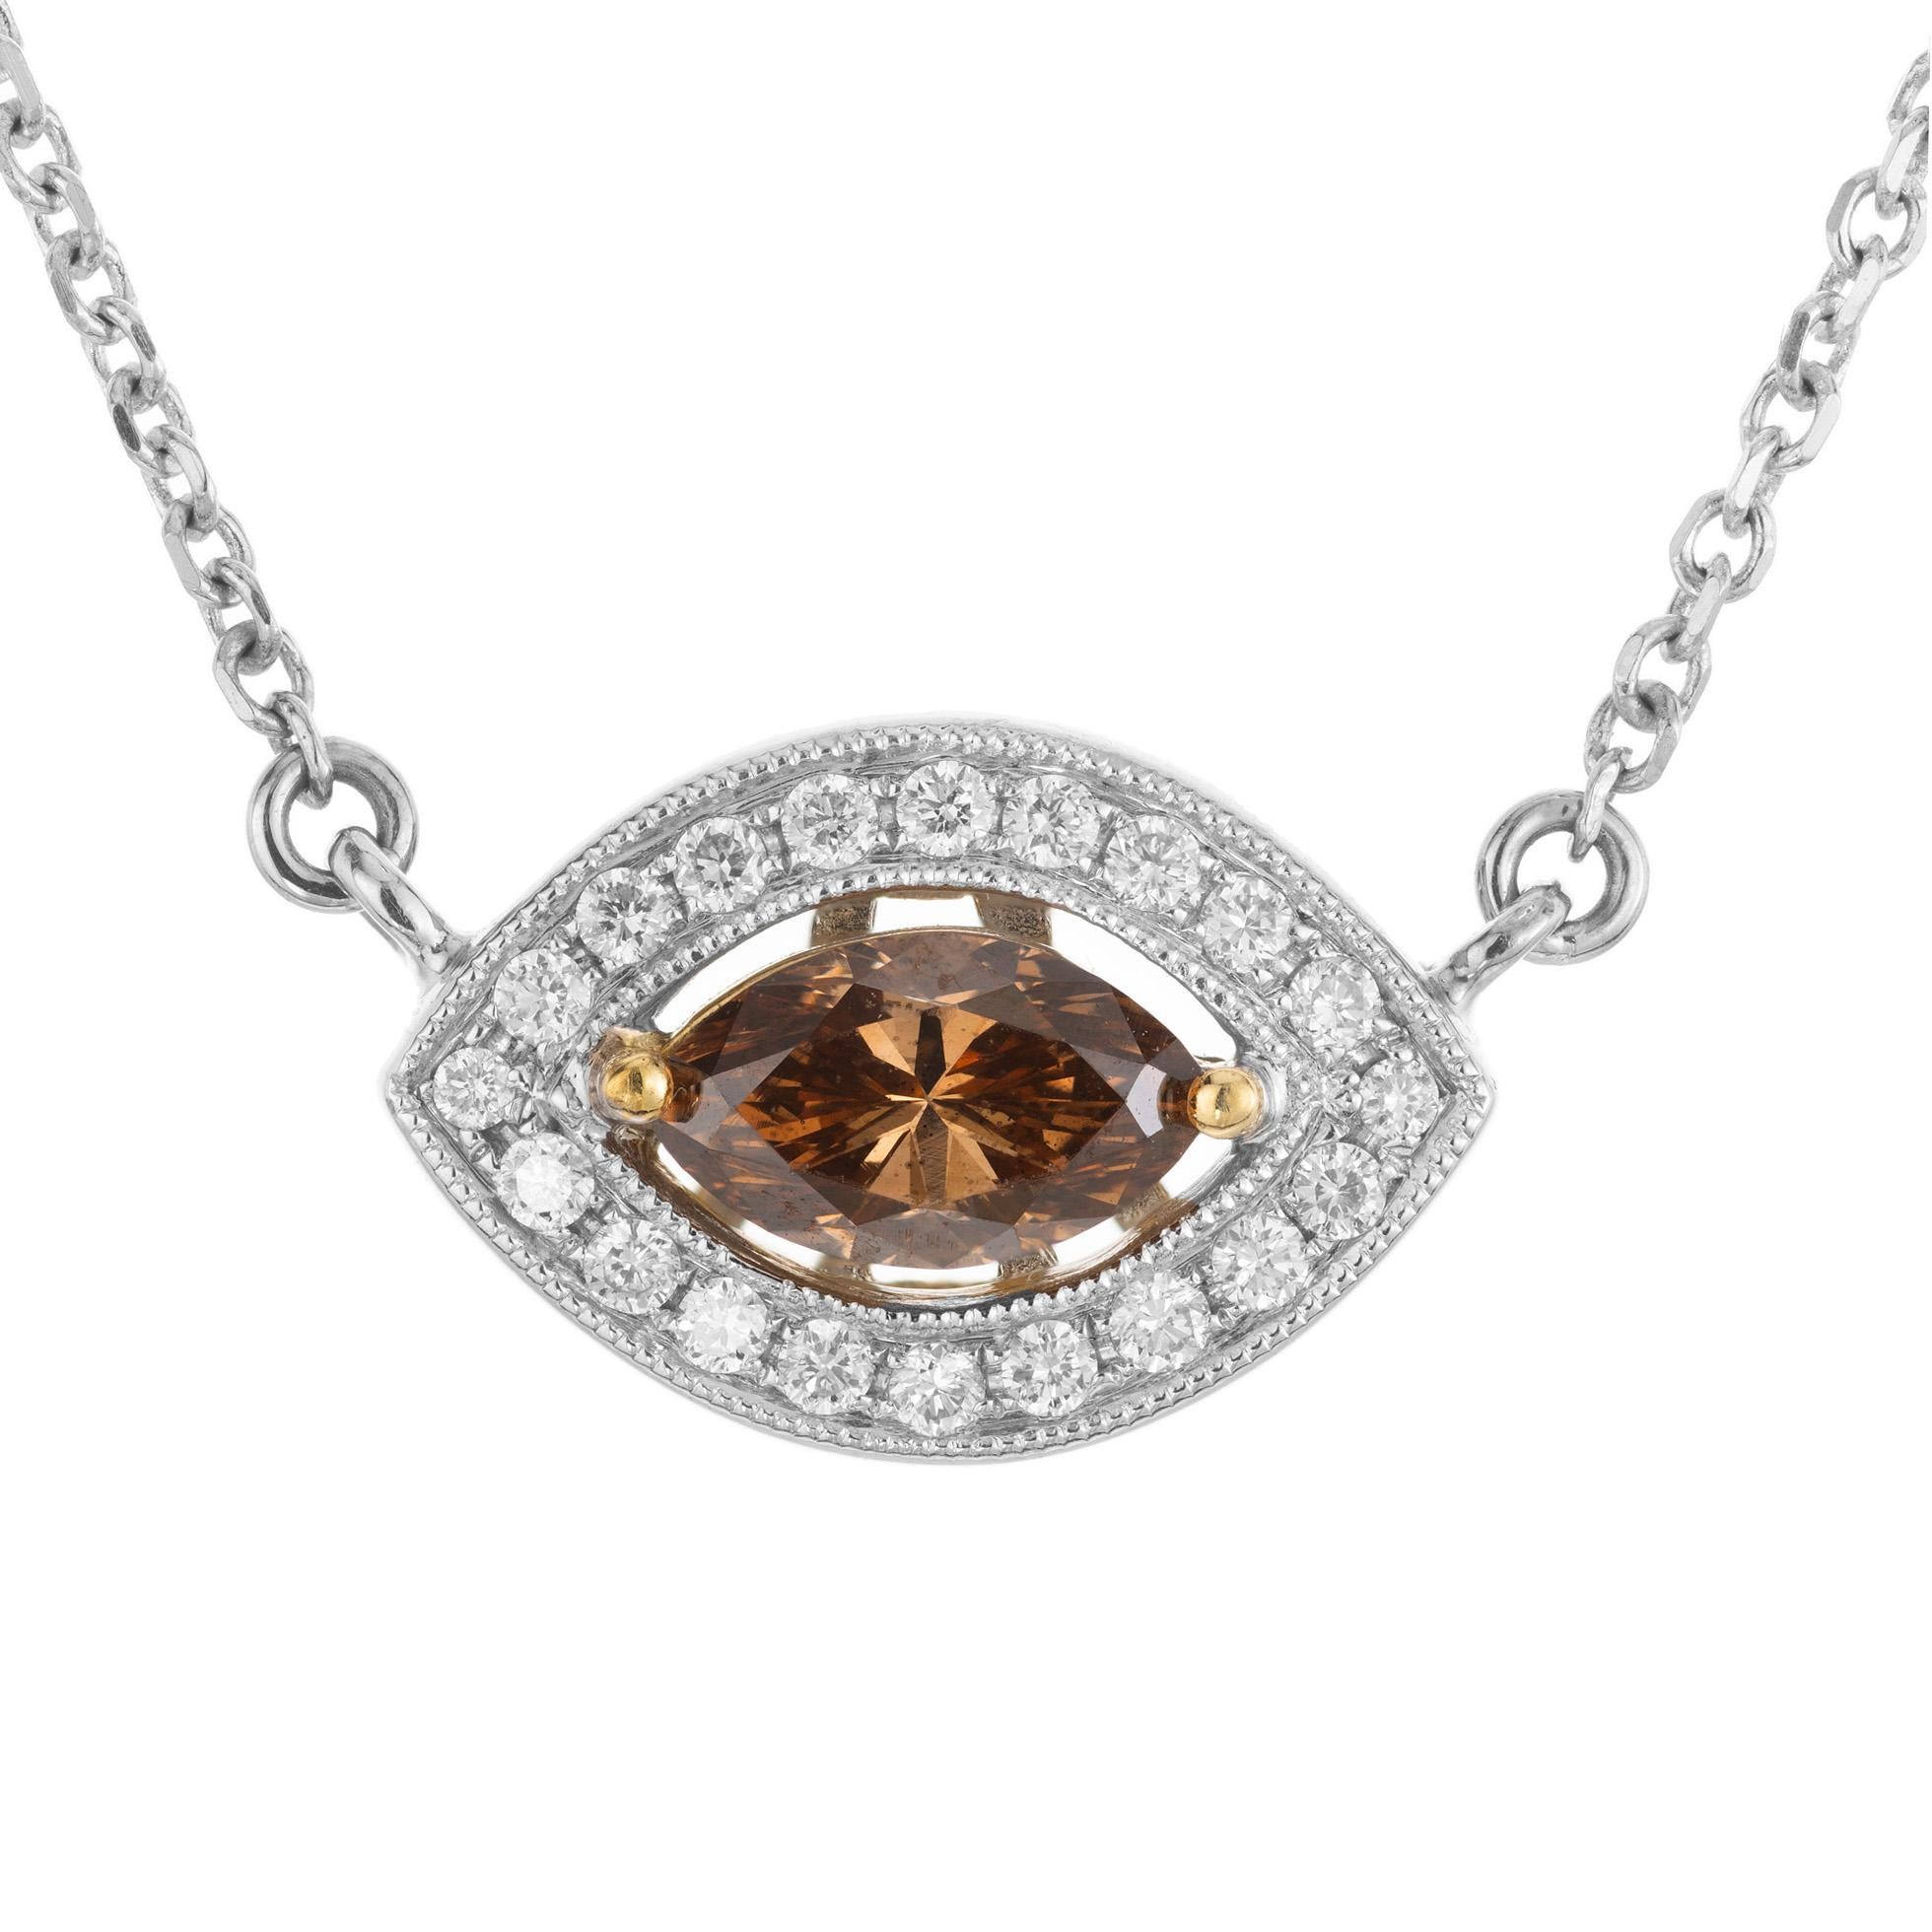 Evil eye style brown diamond pendant necklace. EGl certified as fancy dark orangy brown marquise cut center diamond, mounted in a 14k white gold setting with a halo of 20 round brilliant cut diamonds. The EGL has certified natural, Fancy Dark